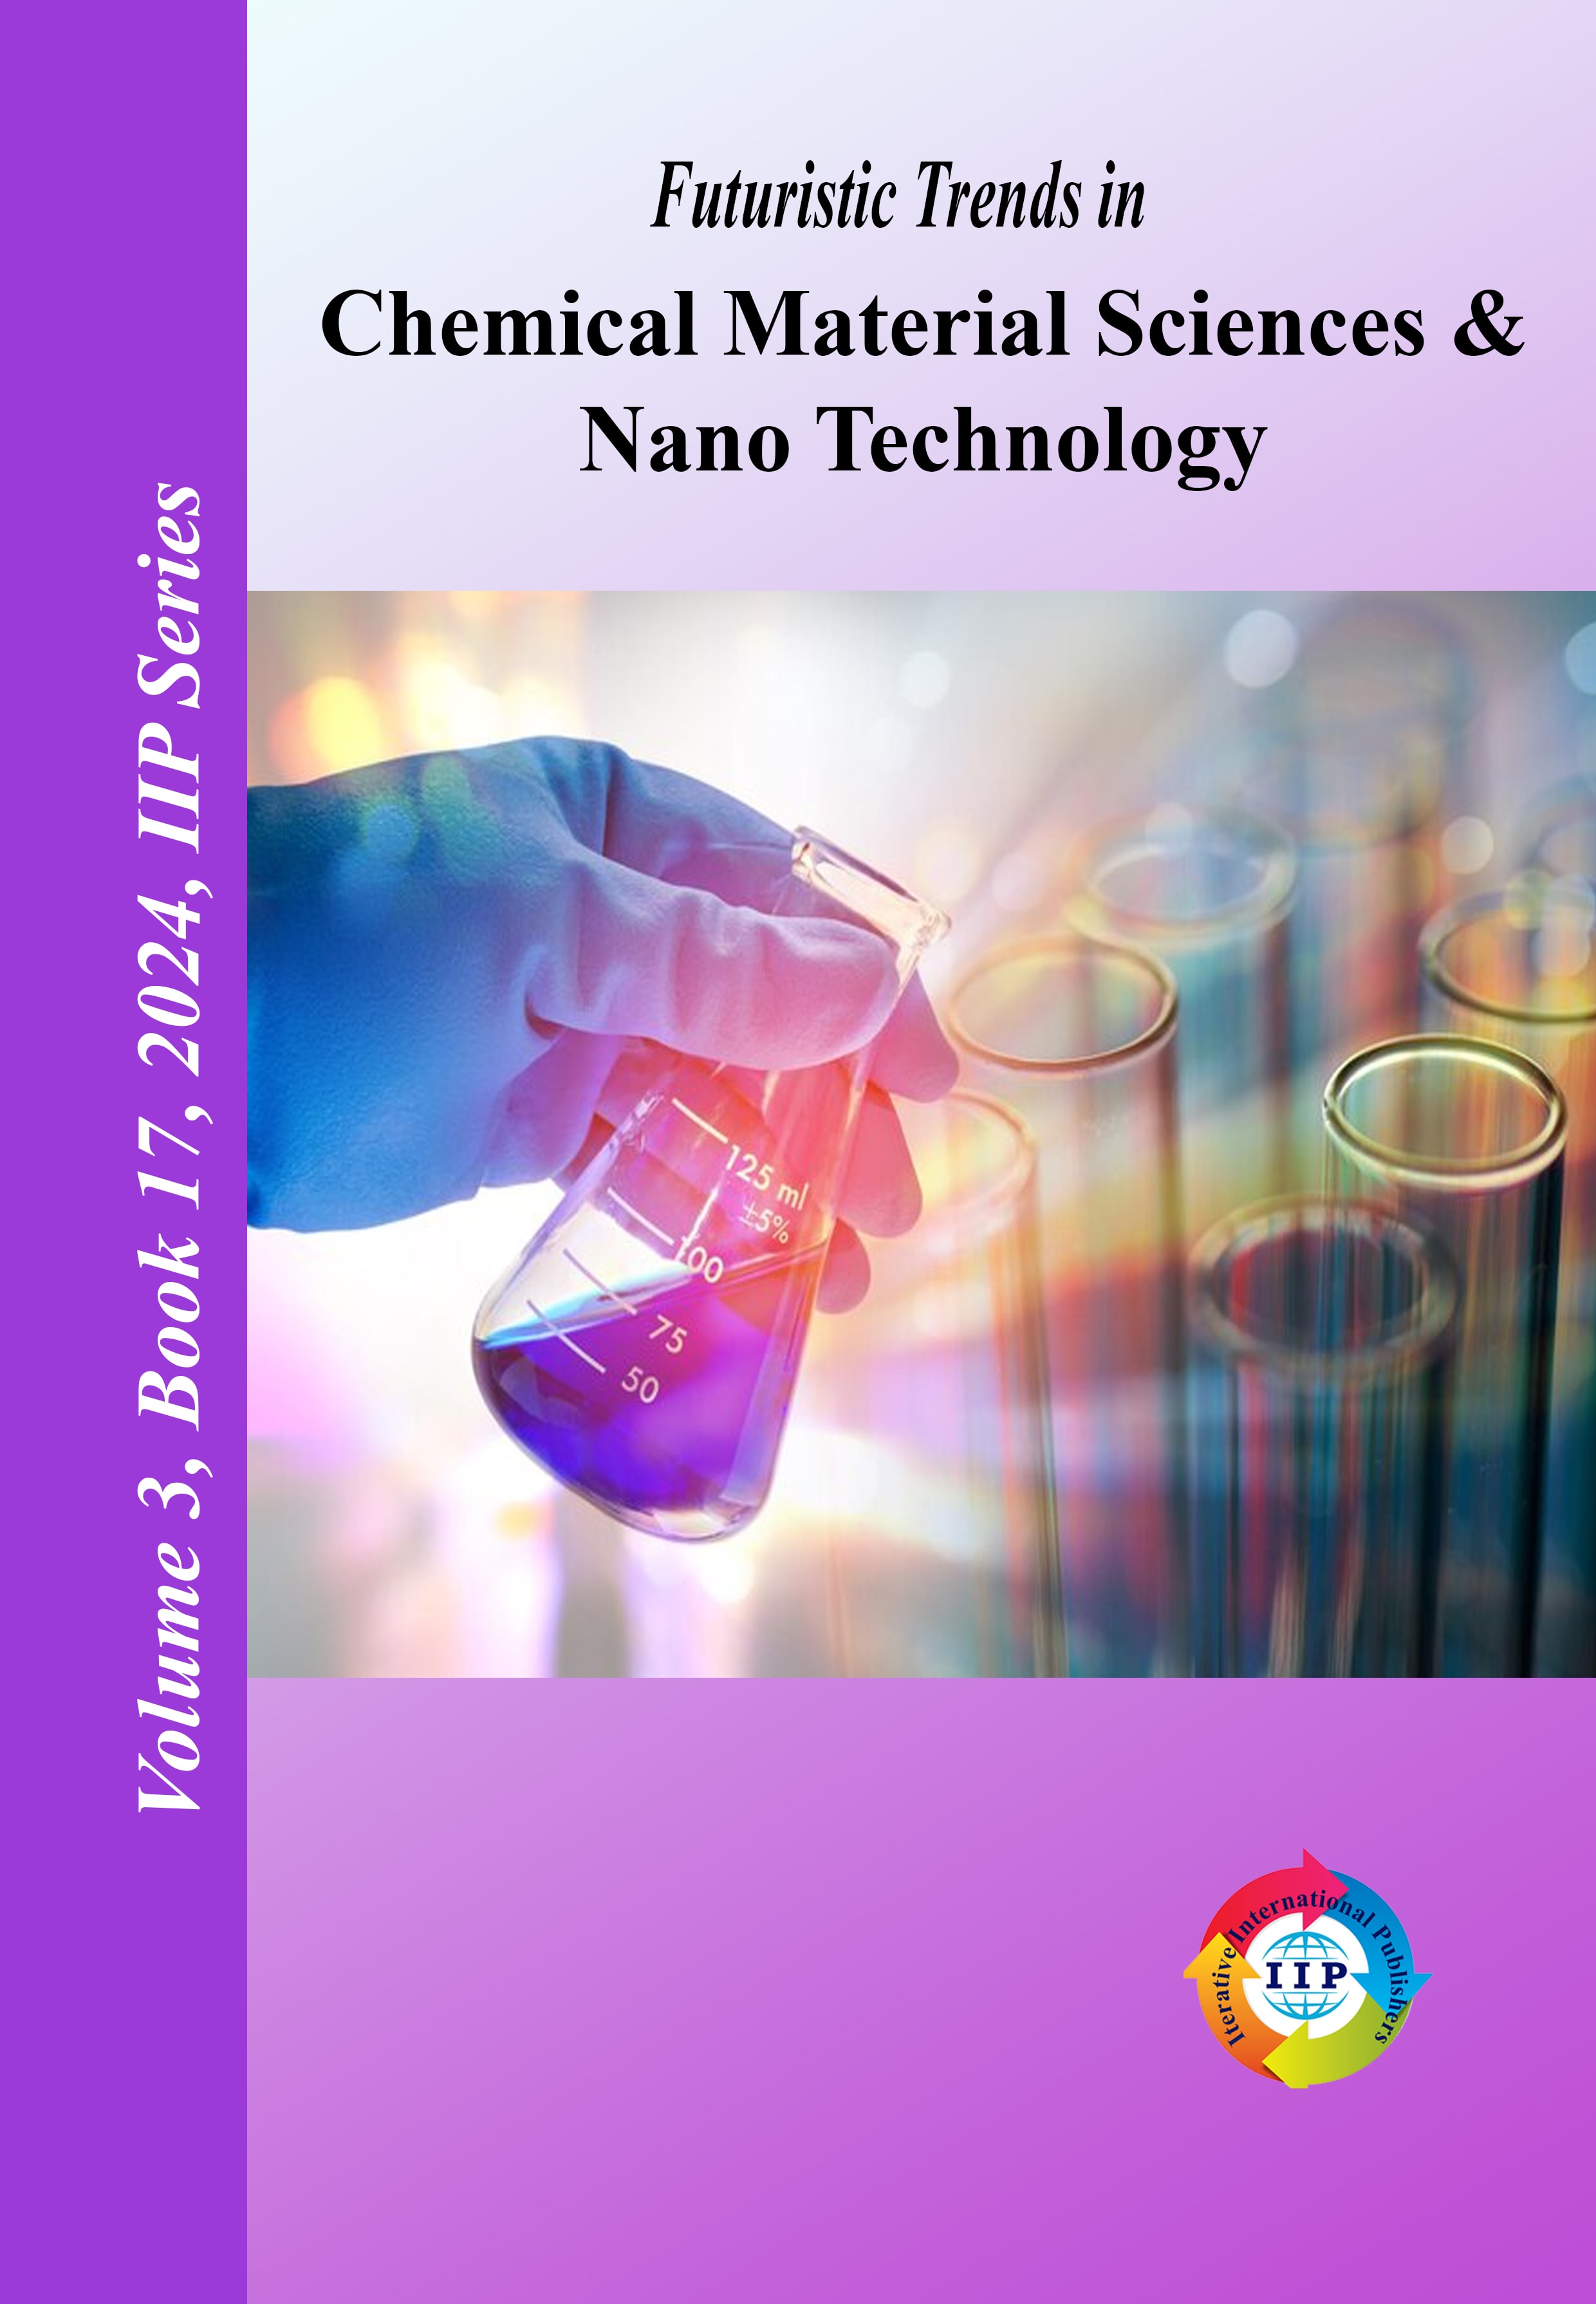 Futuristic Trends in Chemical Material Sciences & Nano Technology  Volume 3 Book 17